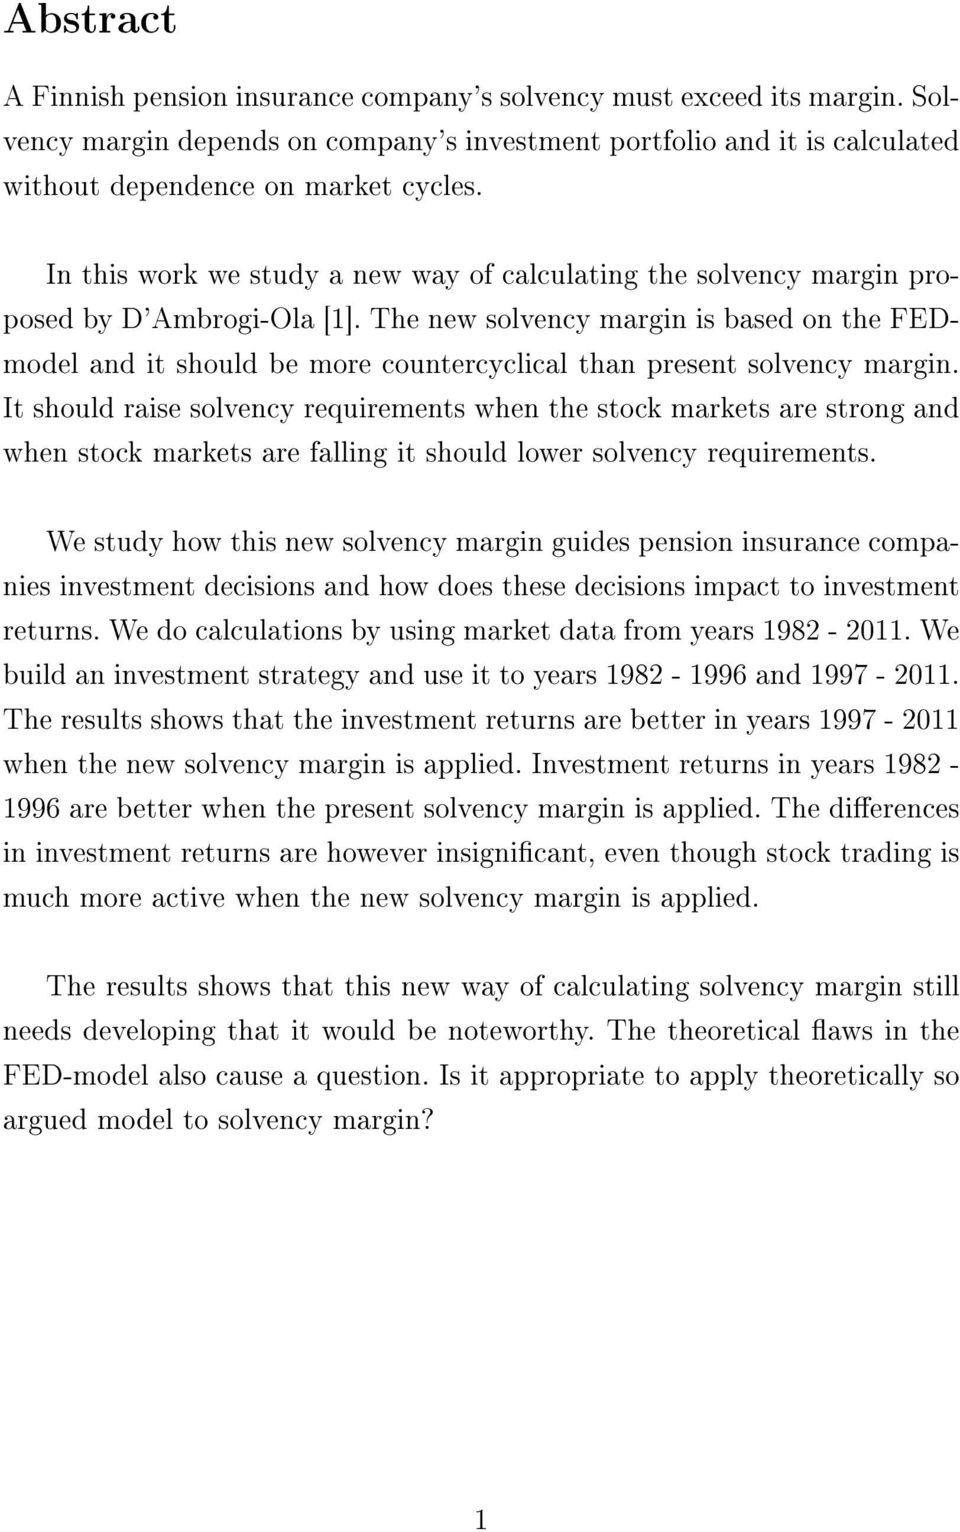 The new solvency margin is based on the FEDmodel and it should be more countercyclical than present solvency margin.